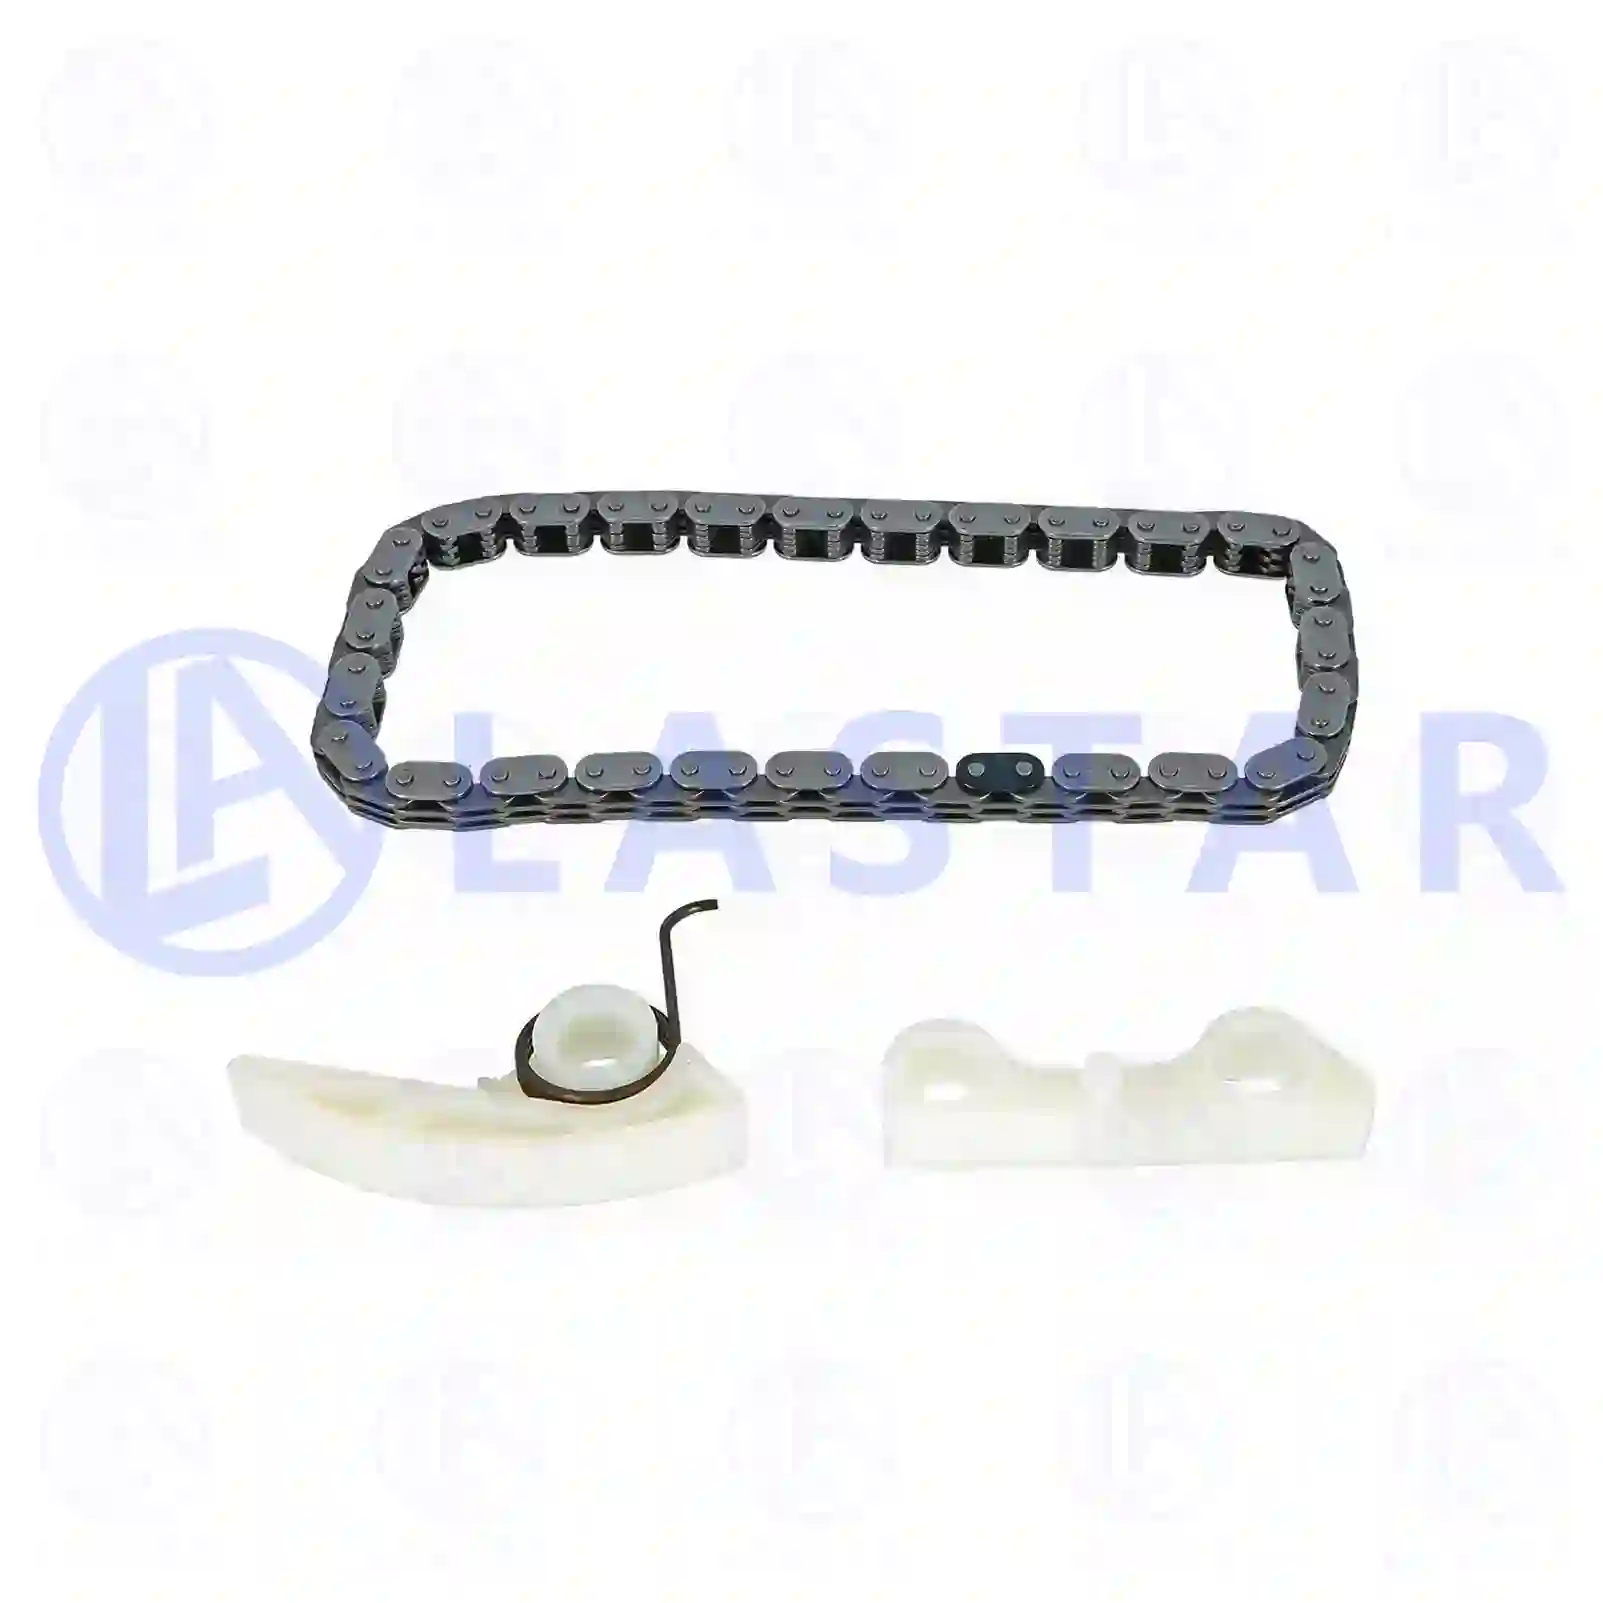 Timing chain kit, 77701091, 1119857S ||  77701091 Lastar Spare Part | Truck Spare Parts, Auotomotive Spare Parts Timing chain kit, 77701091, 1119857S ||  77701091 Lastar Spare Part | Truck Spare Parts, Auotomotive Spare Parts